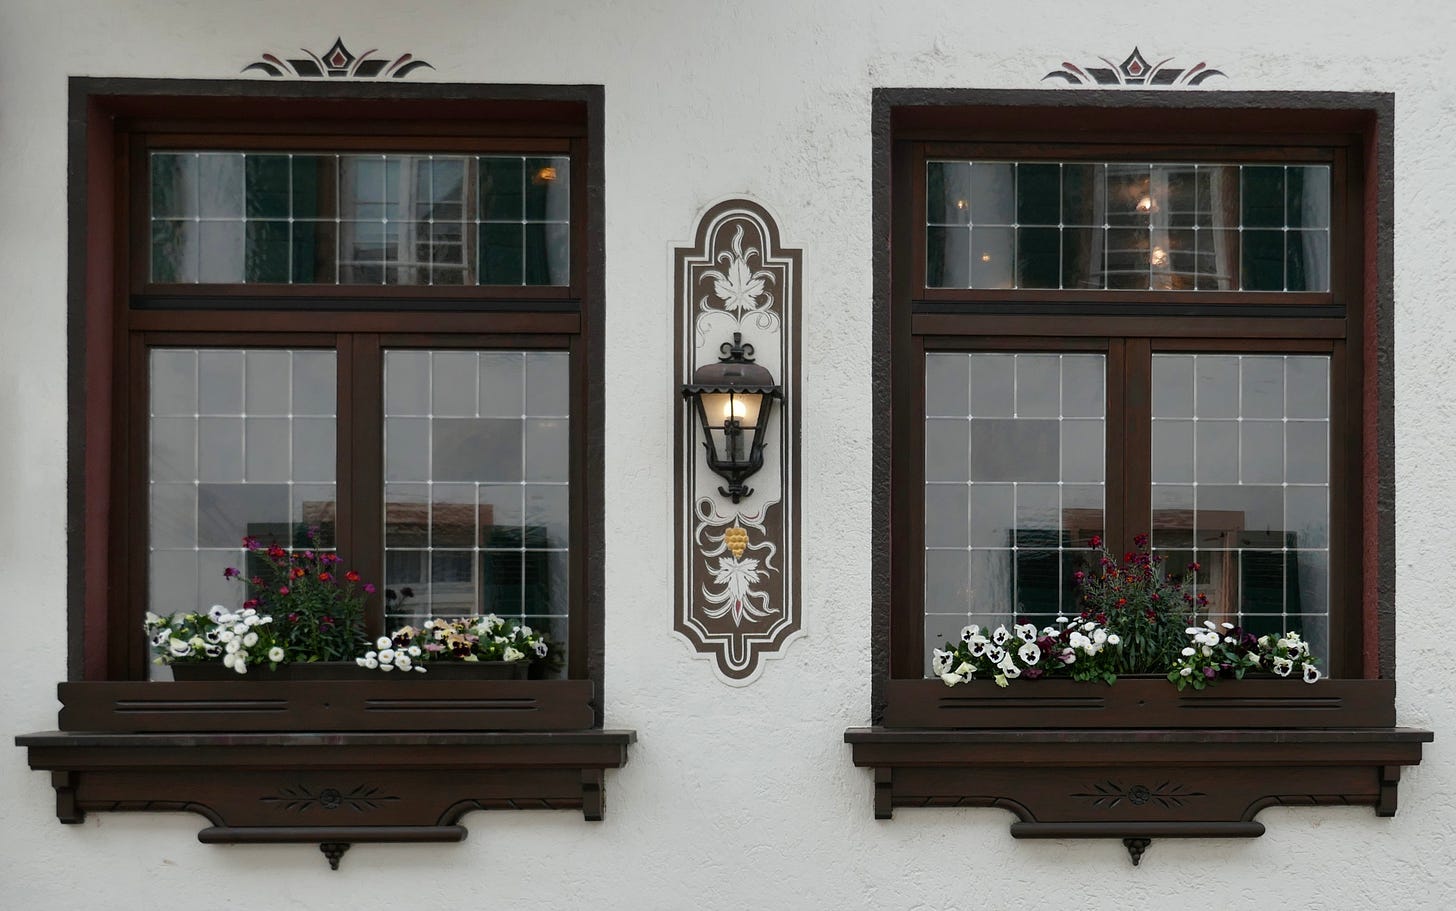 two identical windows against white stucco wall with flower boxes of pansies and other flowers with a lighted sconce between them